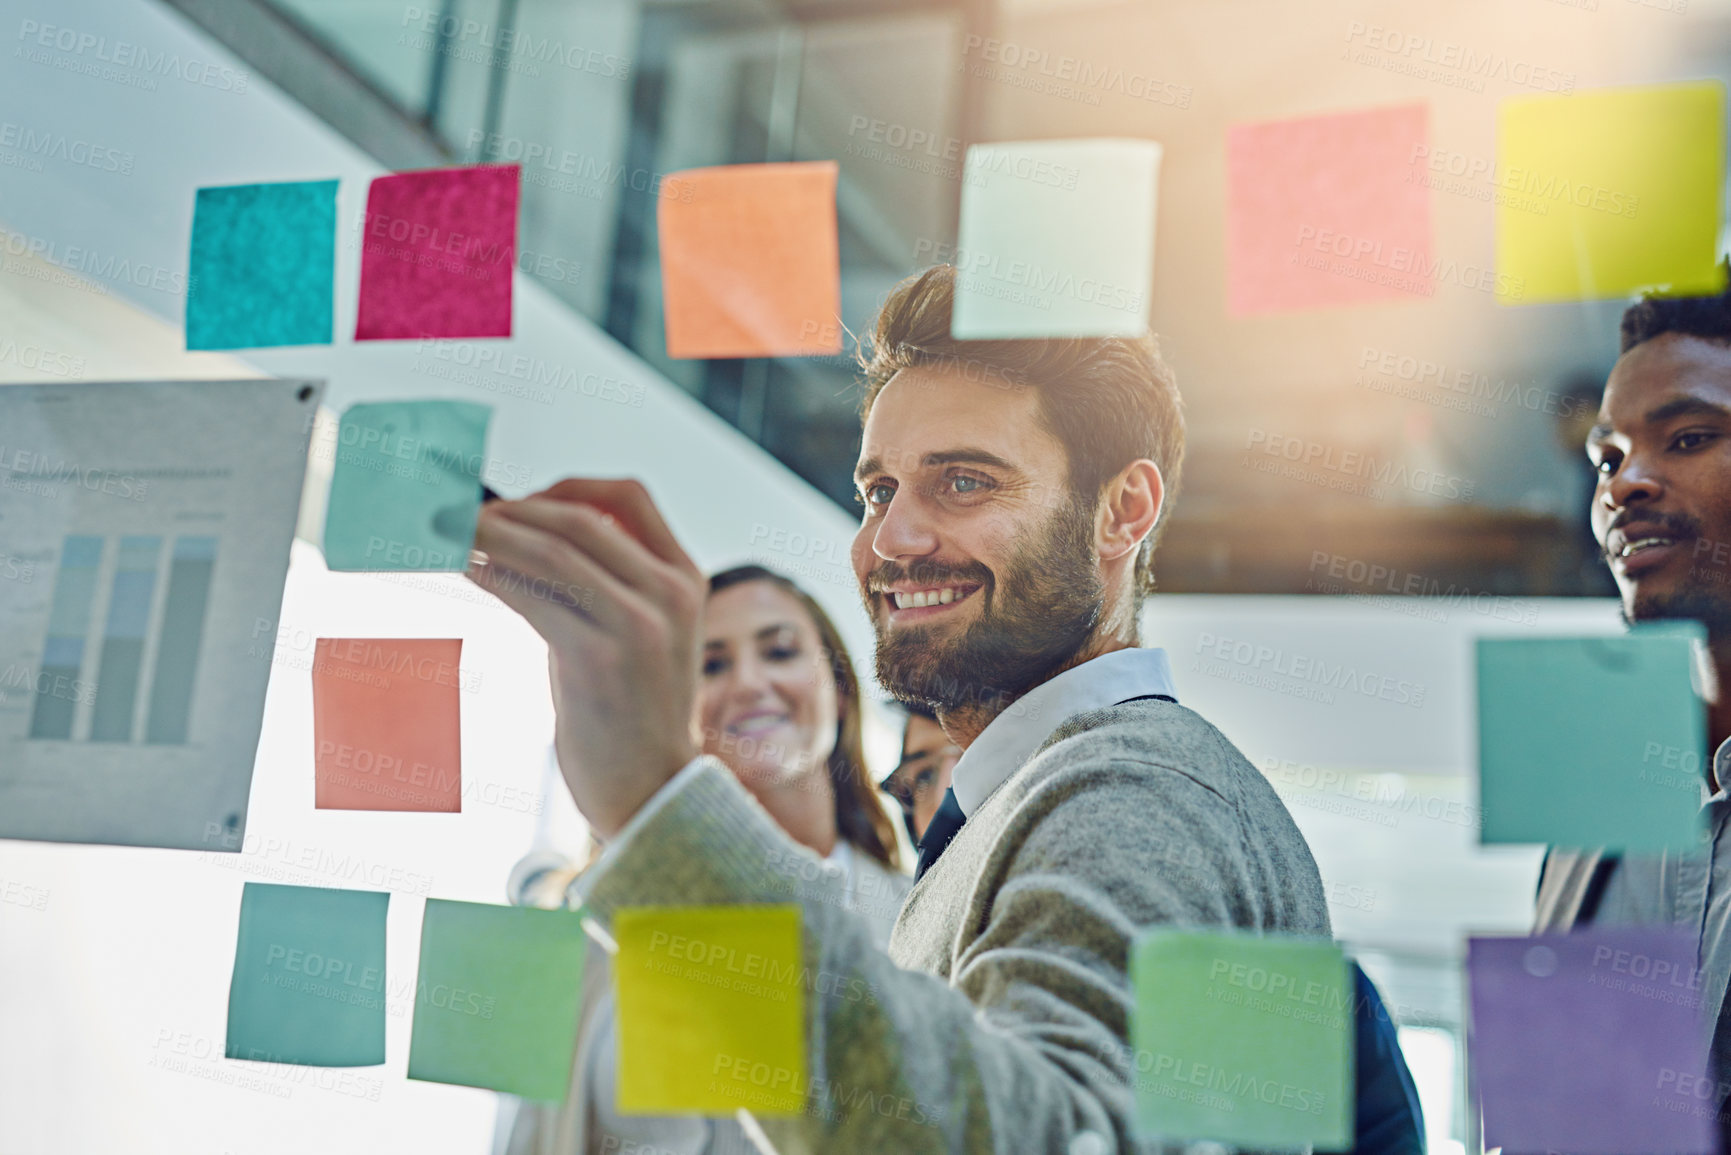 Buy stock photo Cropped shot of a group of businesspeople brainstorming with sticky notes on a glass wall in an office